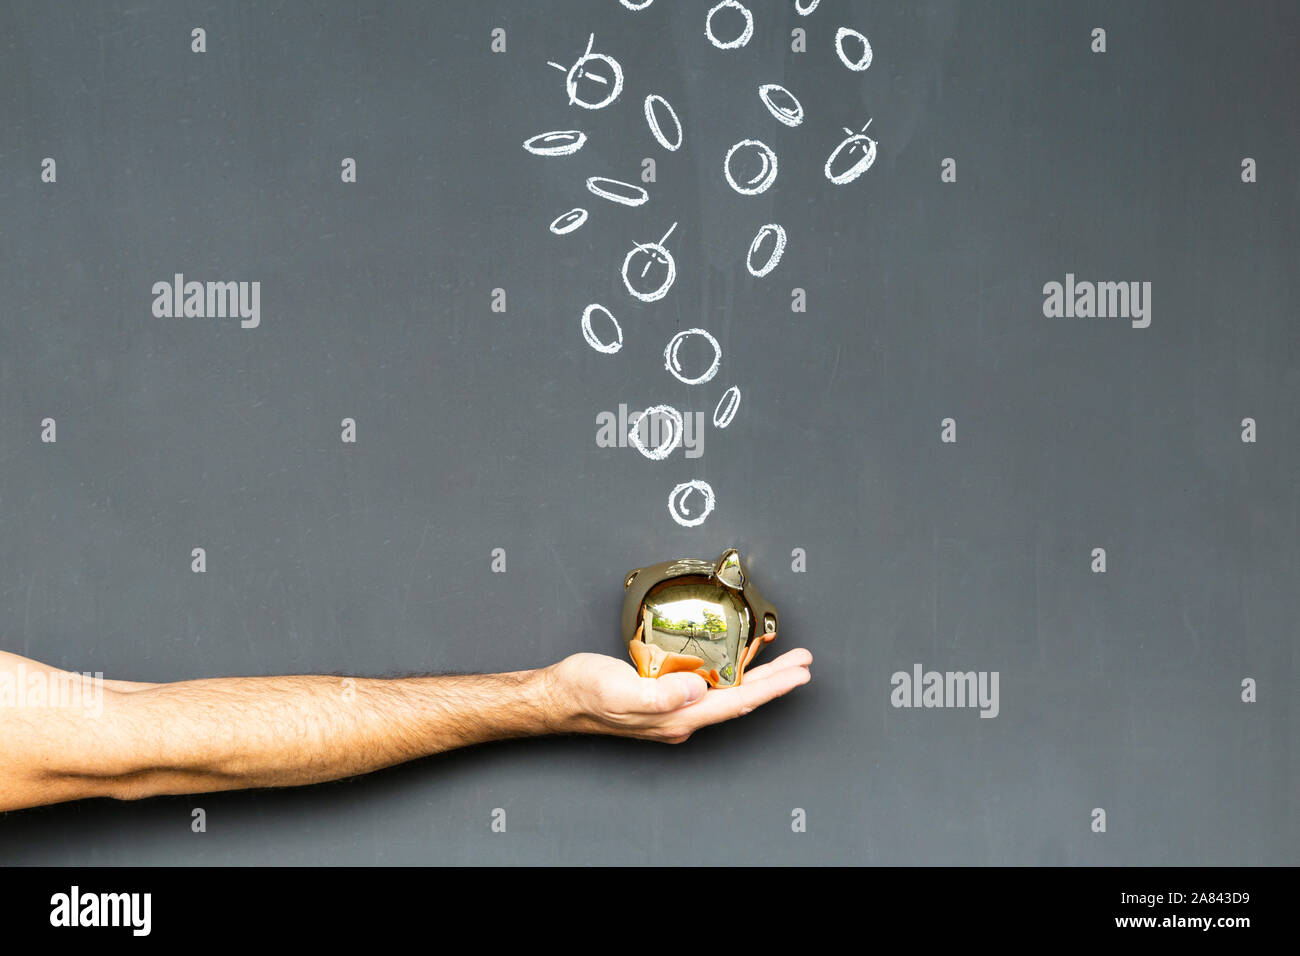 Concept of saving money with a gold colored piggy bank held in a hand in front of a blackboard with hand drawn coins Stock Photo